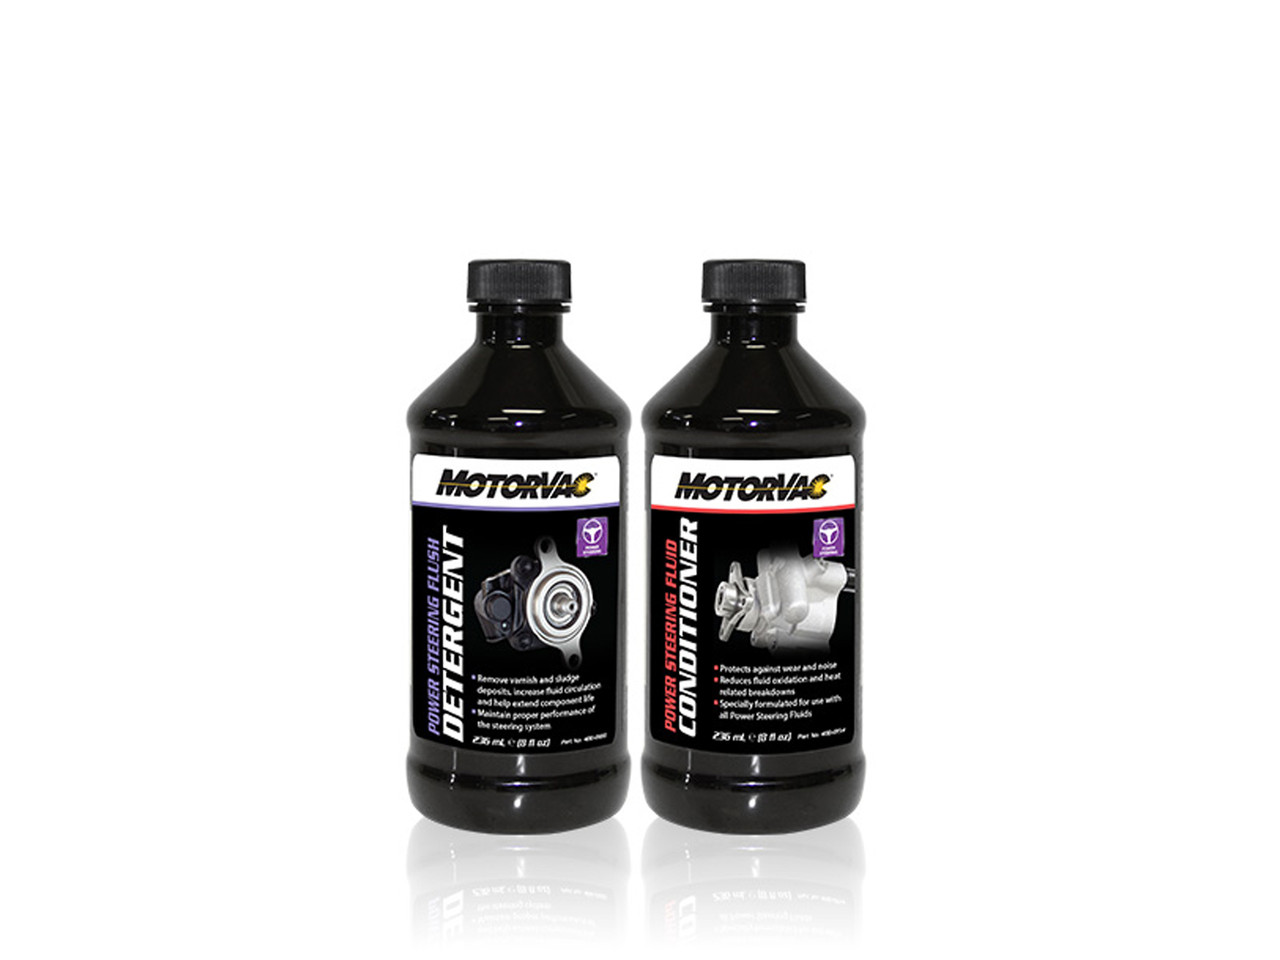 SteerClean 2-Step Power Steering Flush and Conditioner Kit 400-1045